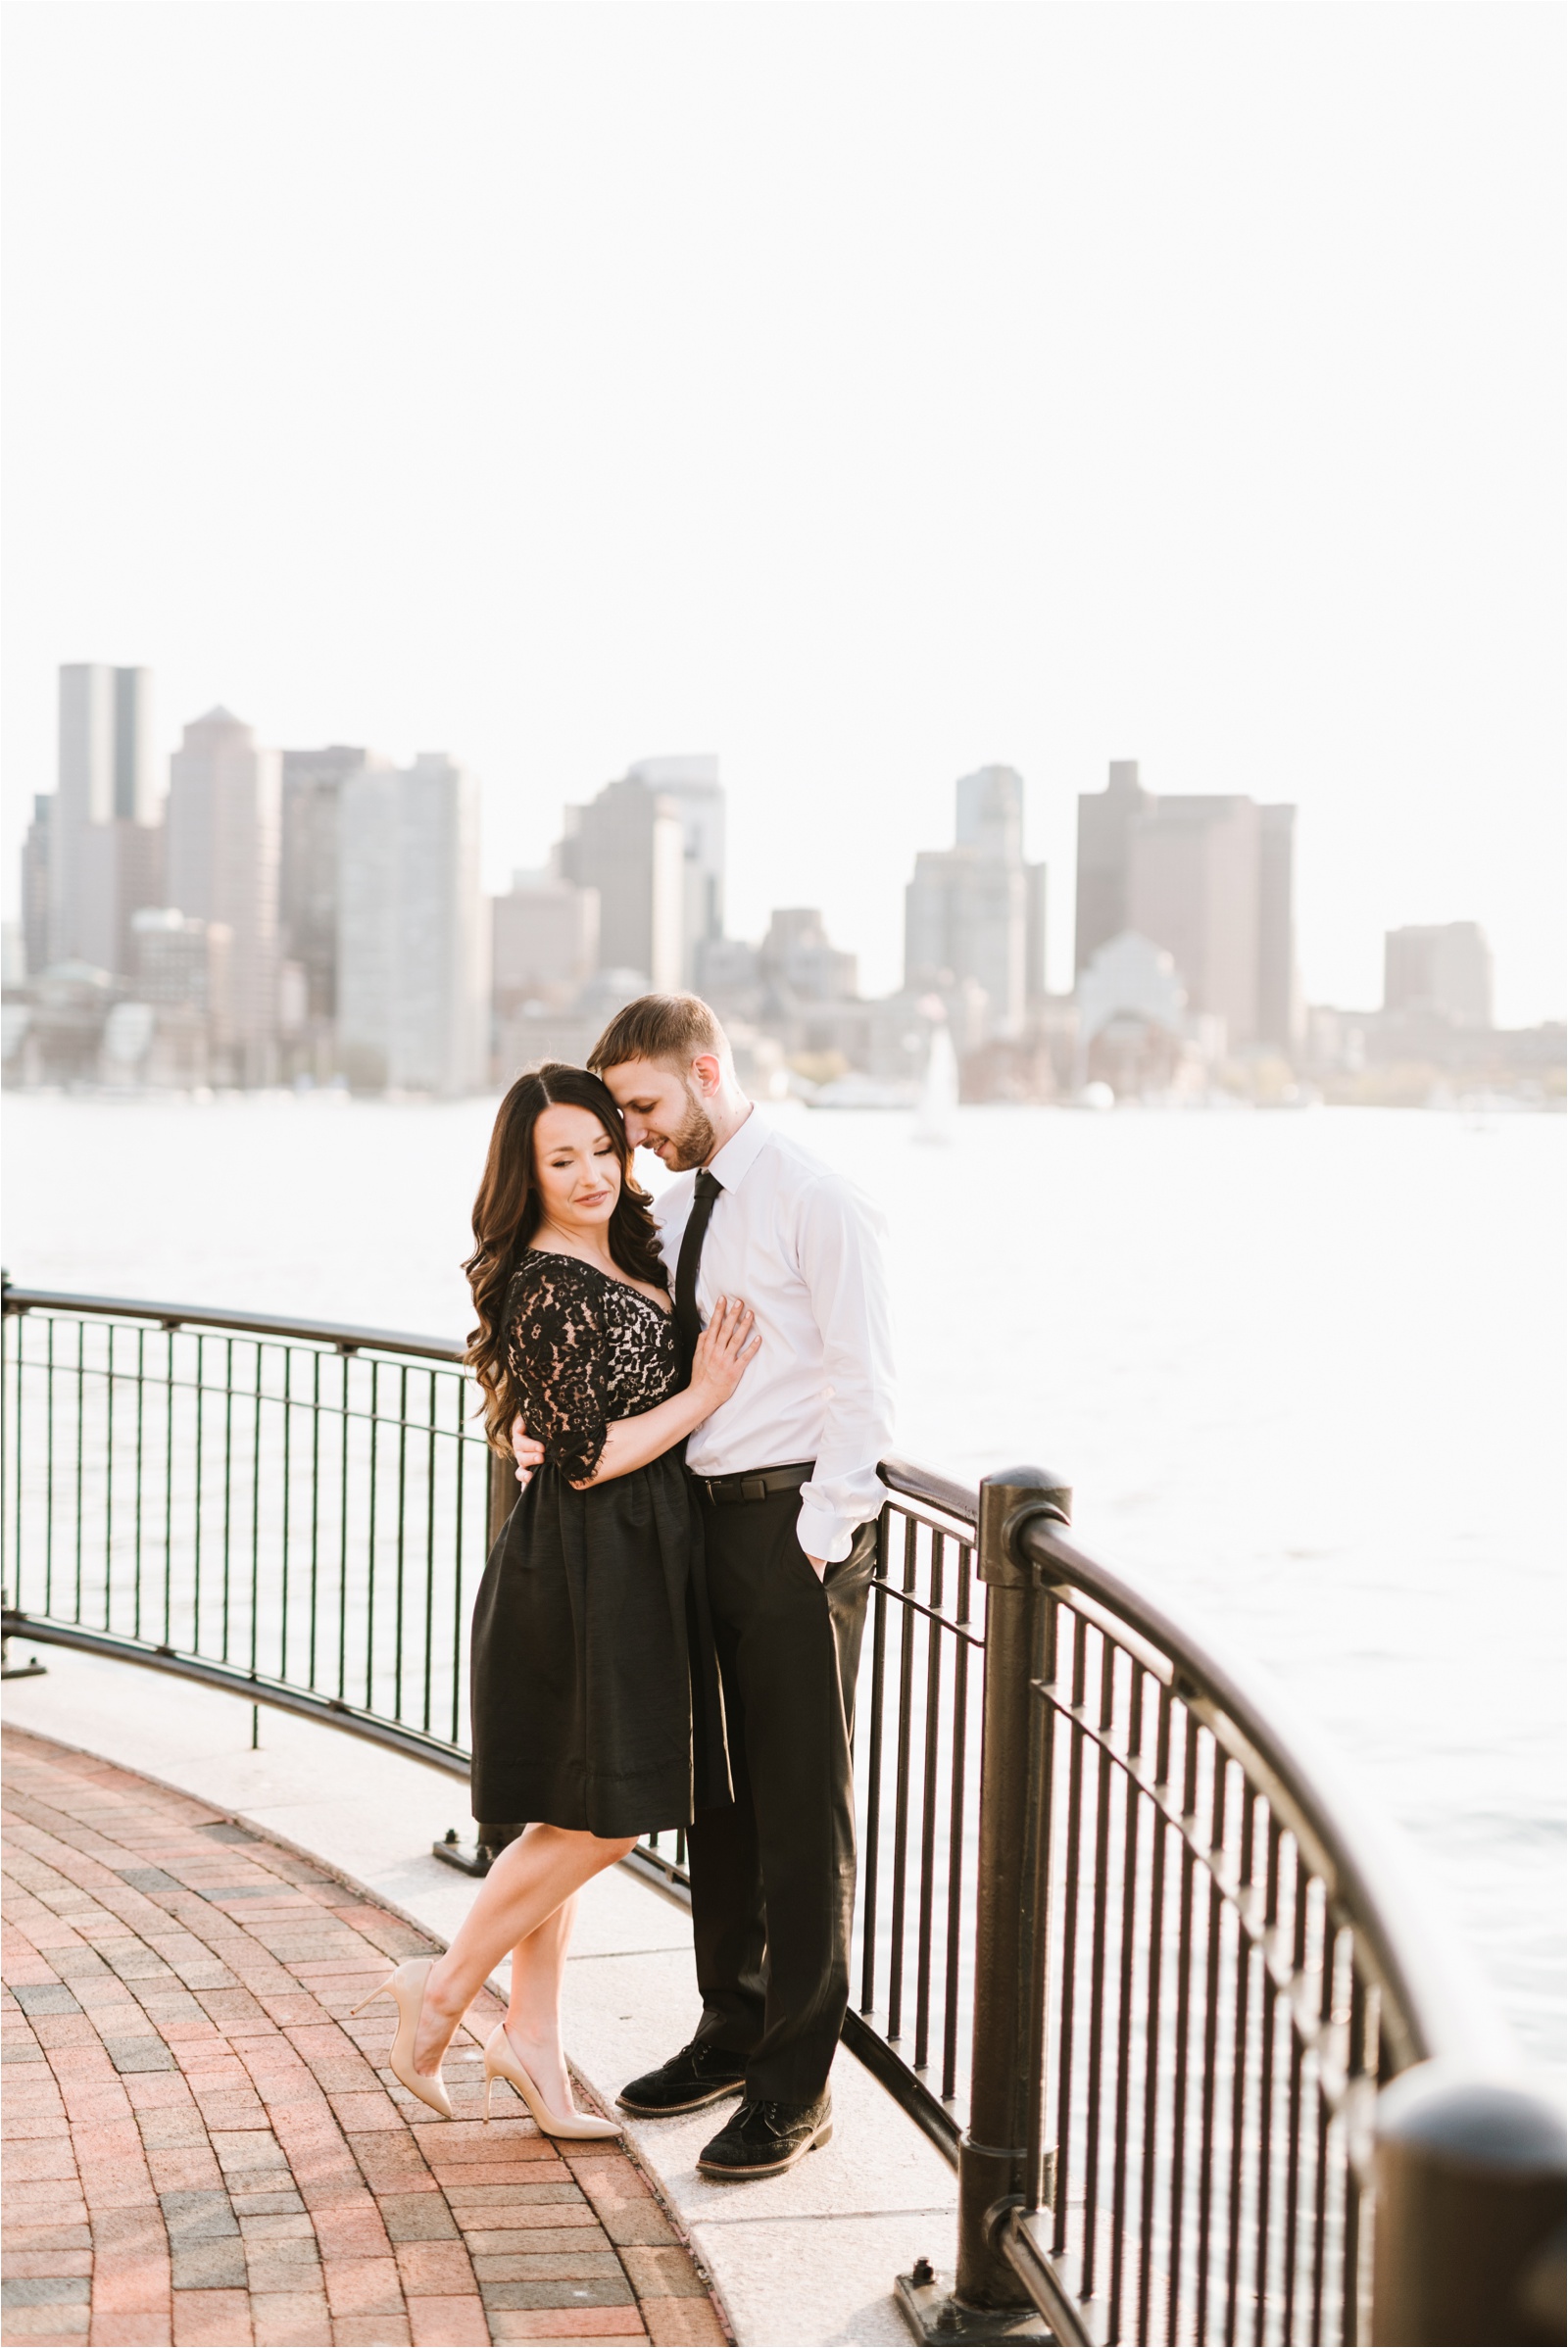 Formal Sunset Engagement Session at Piers Park in East Boston, MA by Boston Wedding Photographer Annmarie Swift